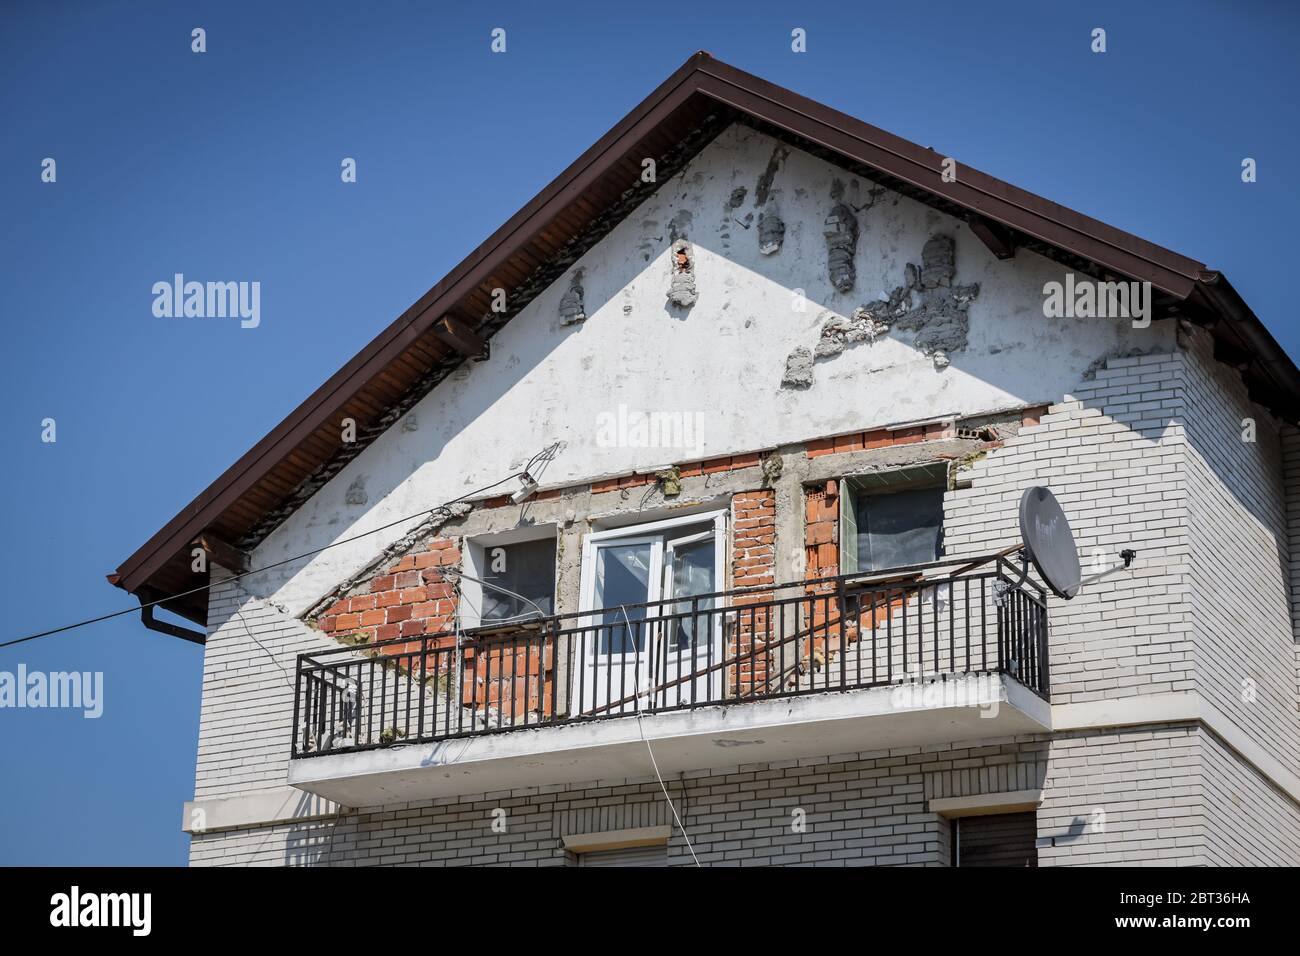 Zagreb, Croatia - 12 April, 2020 : Damage house after a strong earthquake of 5.5 on the Richter scale one month ago in Zagreb, Croatia Stock Photo